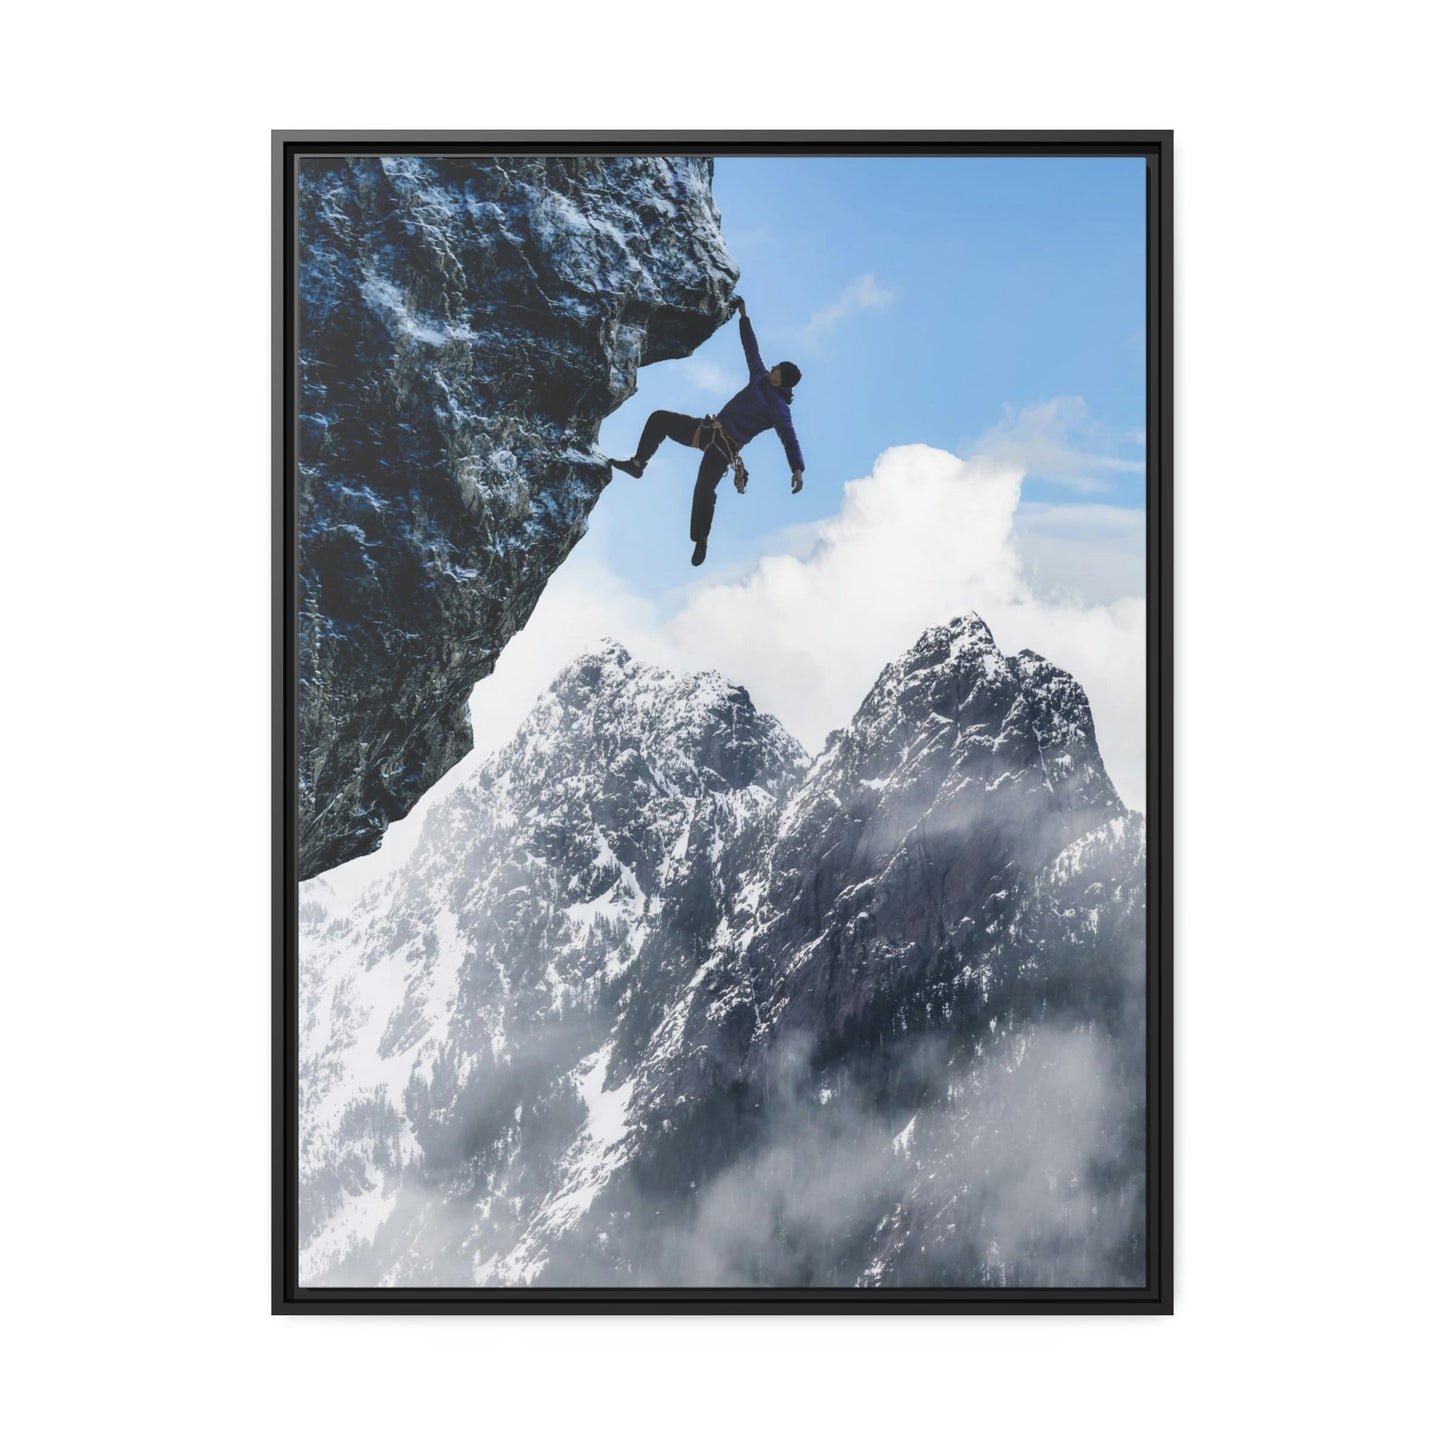 The Art of Adventure: A Thrilling Print on Canvas for Your Home Decor